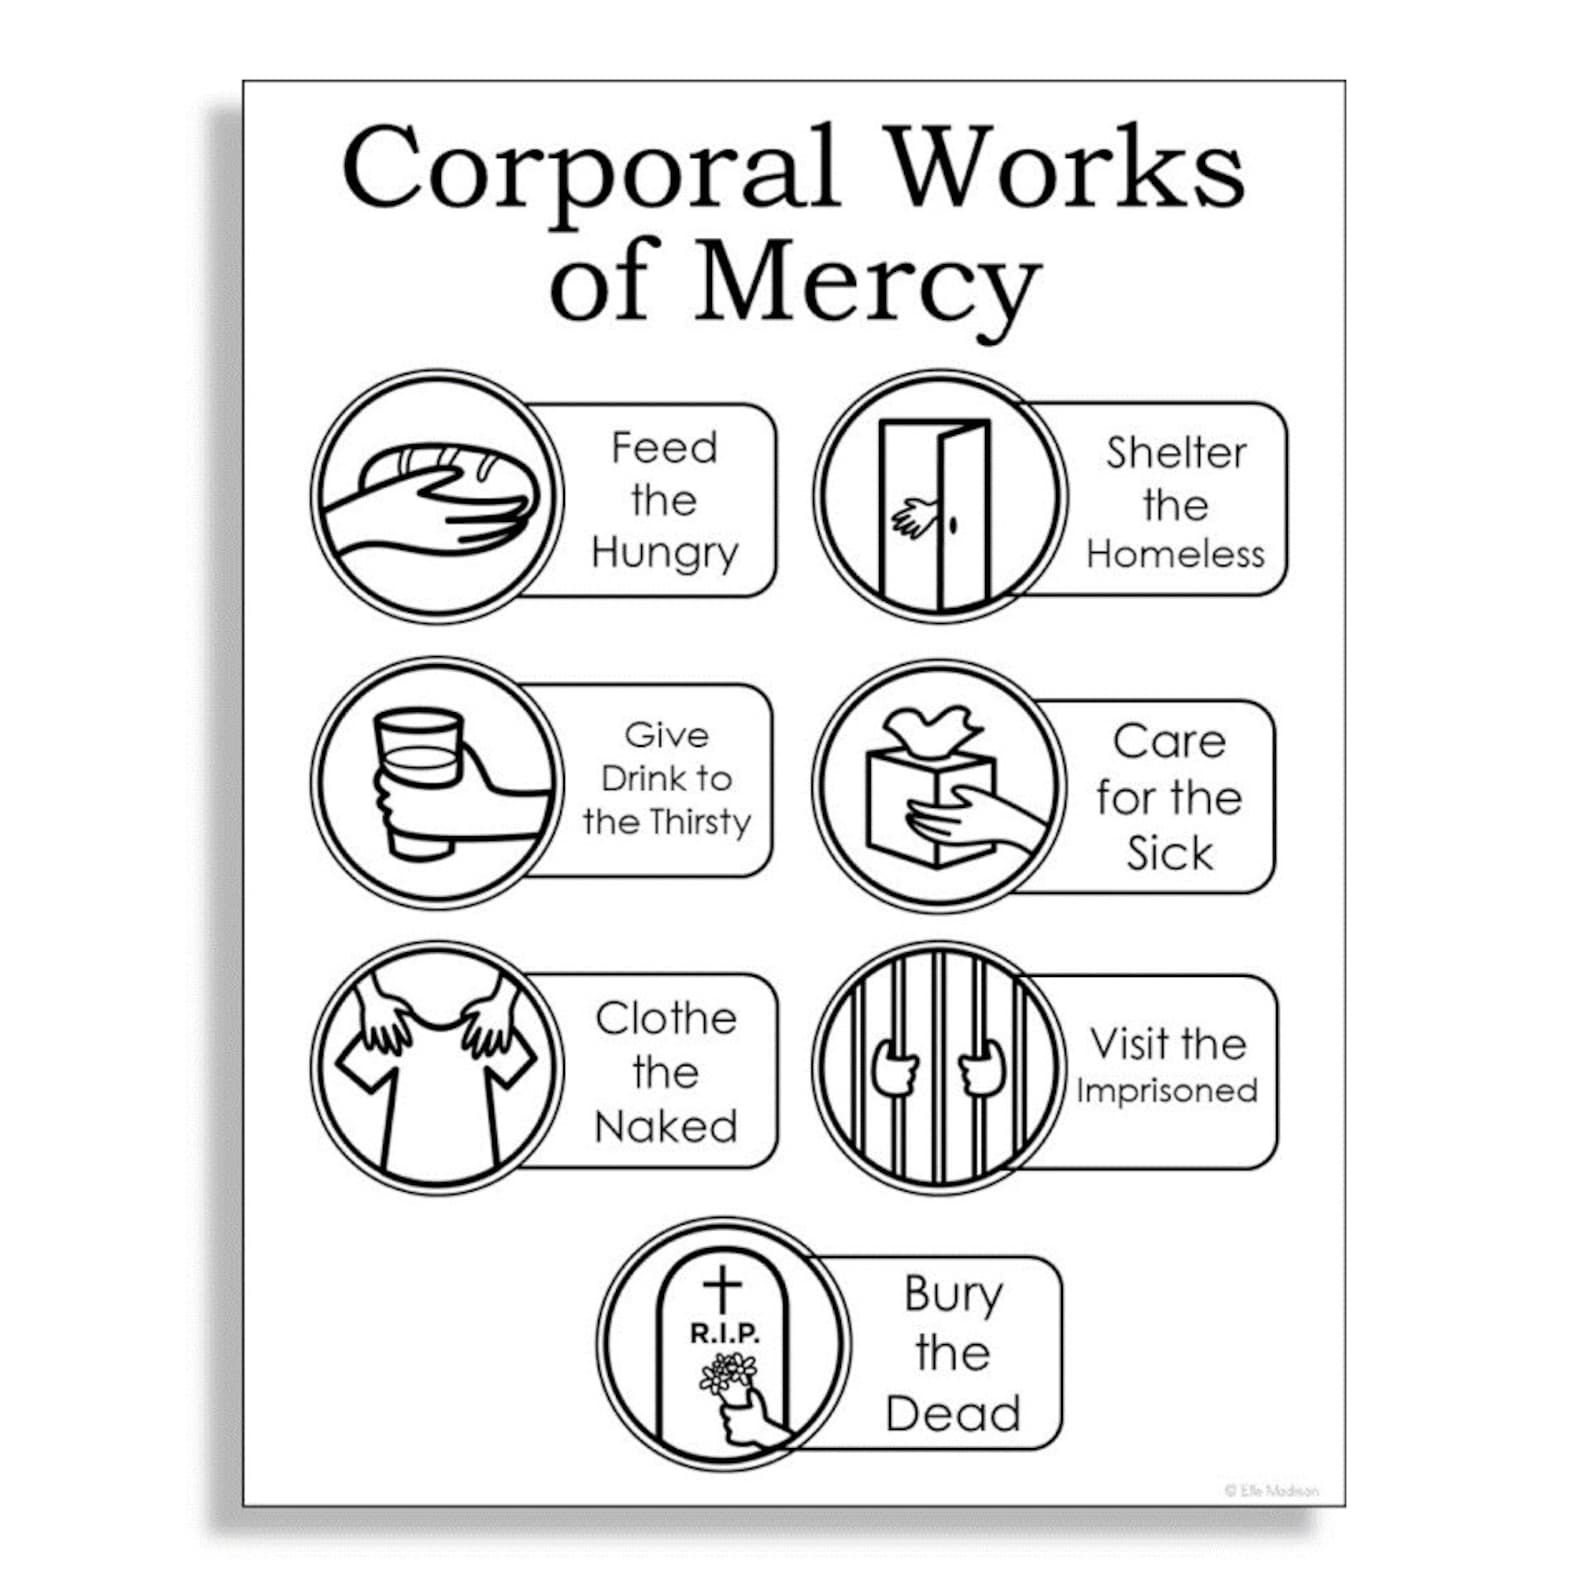 corporal-works-of-mercy-catholic-poster-coloring-page-for-etsy